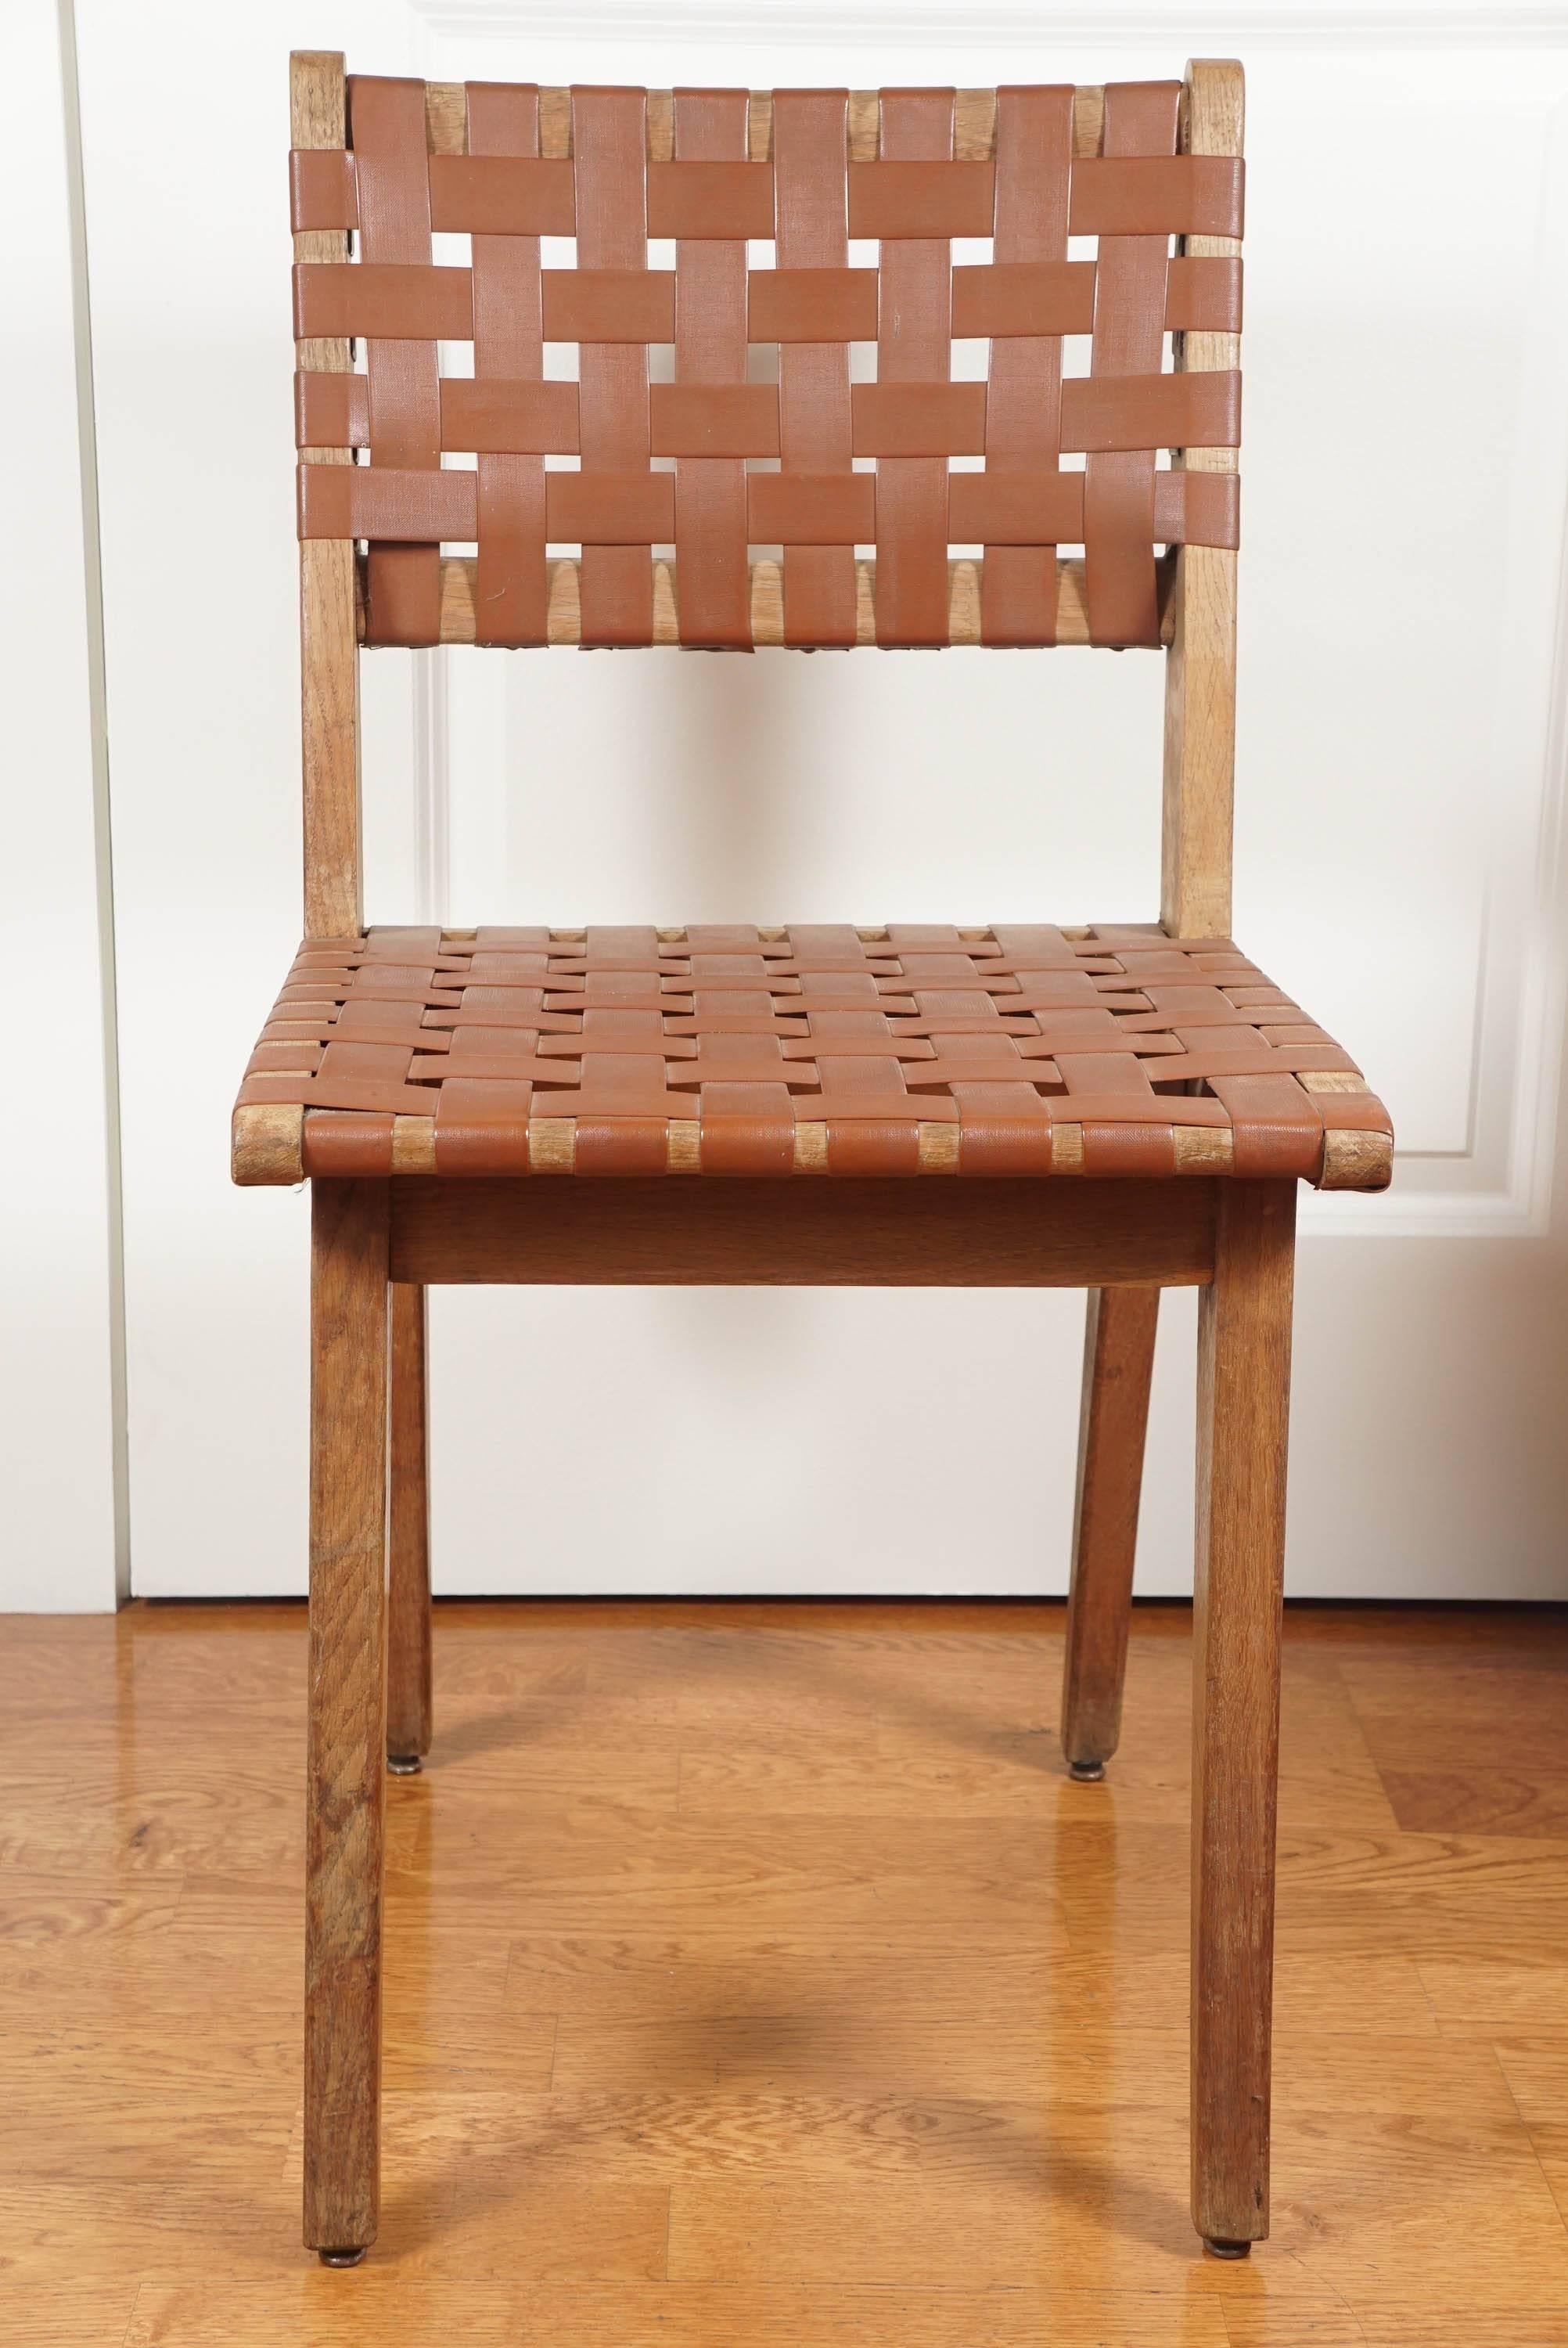 Oak dining chair, with nylon webbing, in the manner of Jens Risom for Knoll.
A quantity of ten are available.